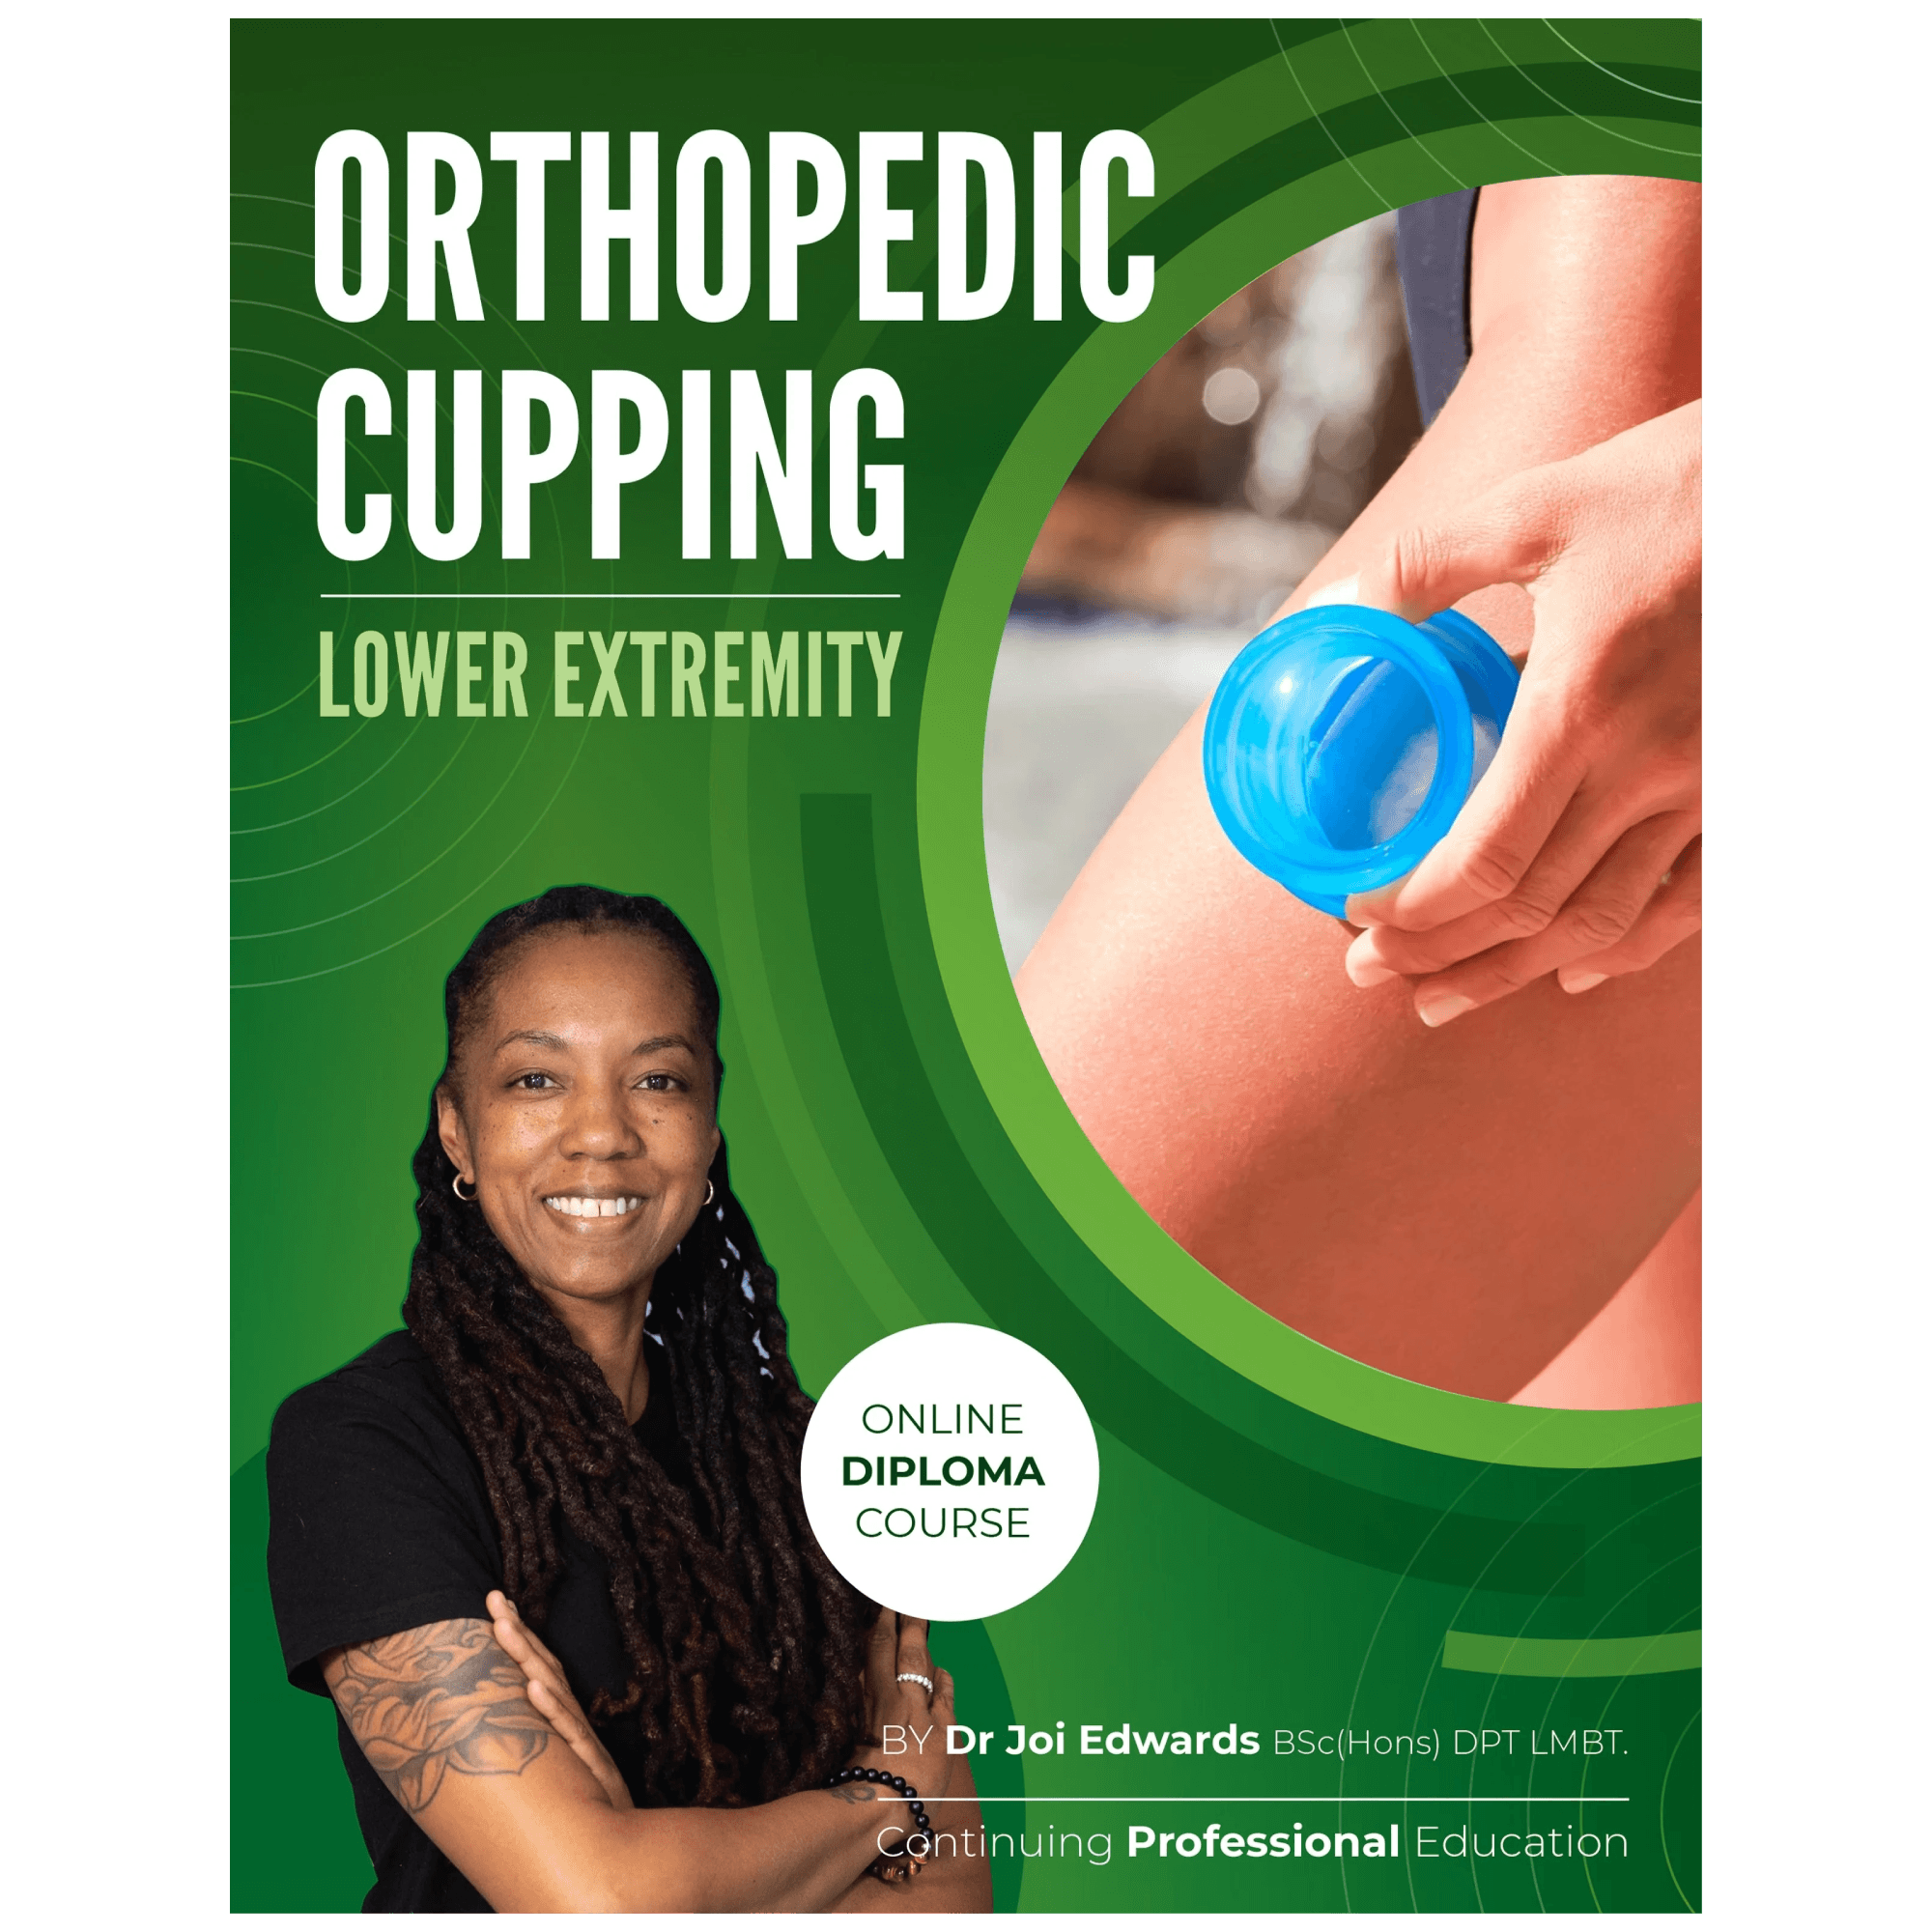 Orthopedic Cupping Lower Extremity